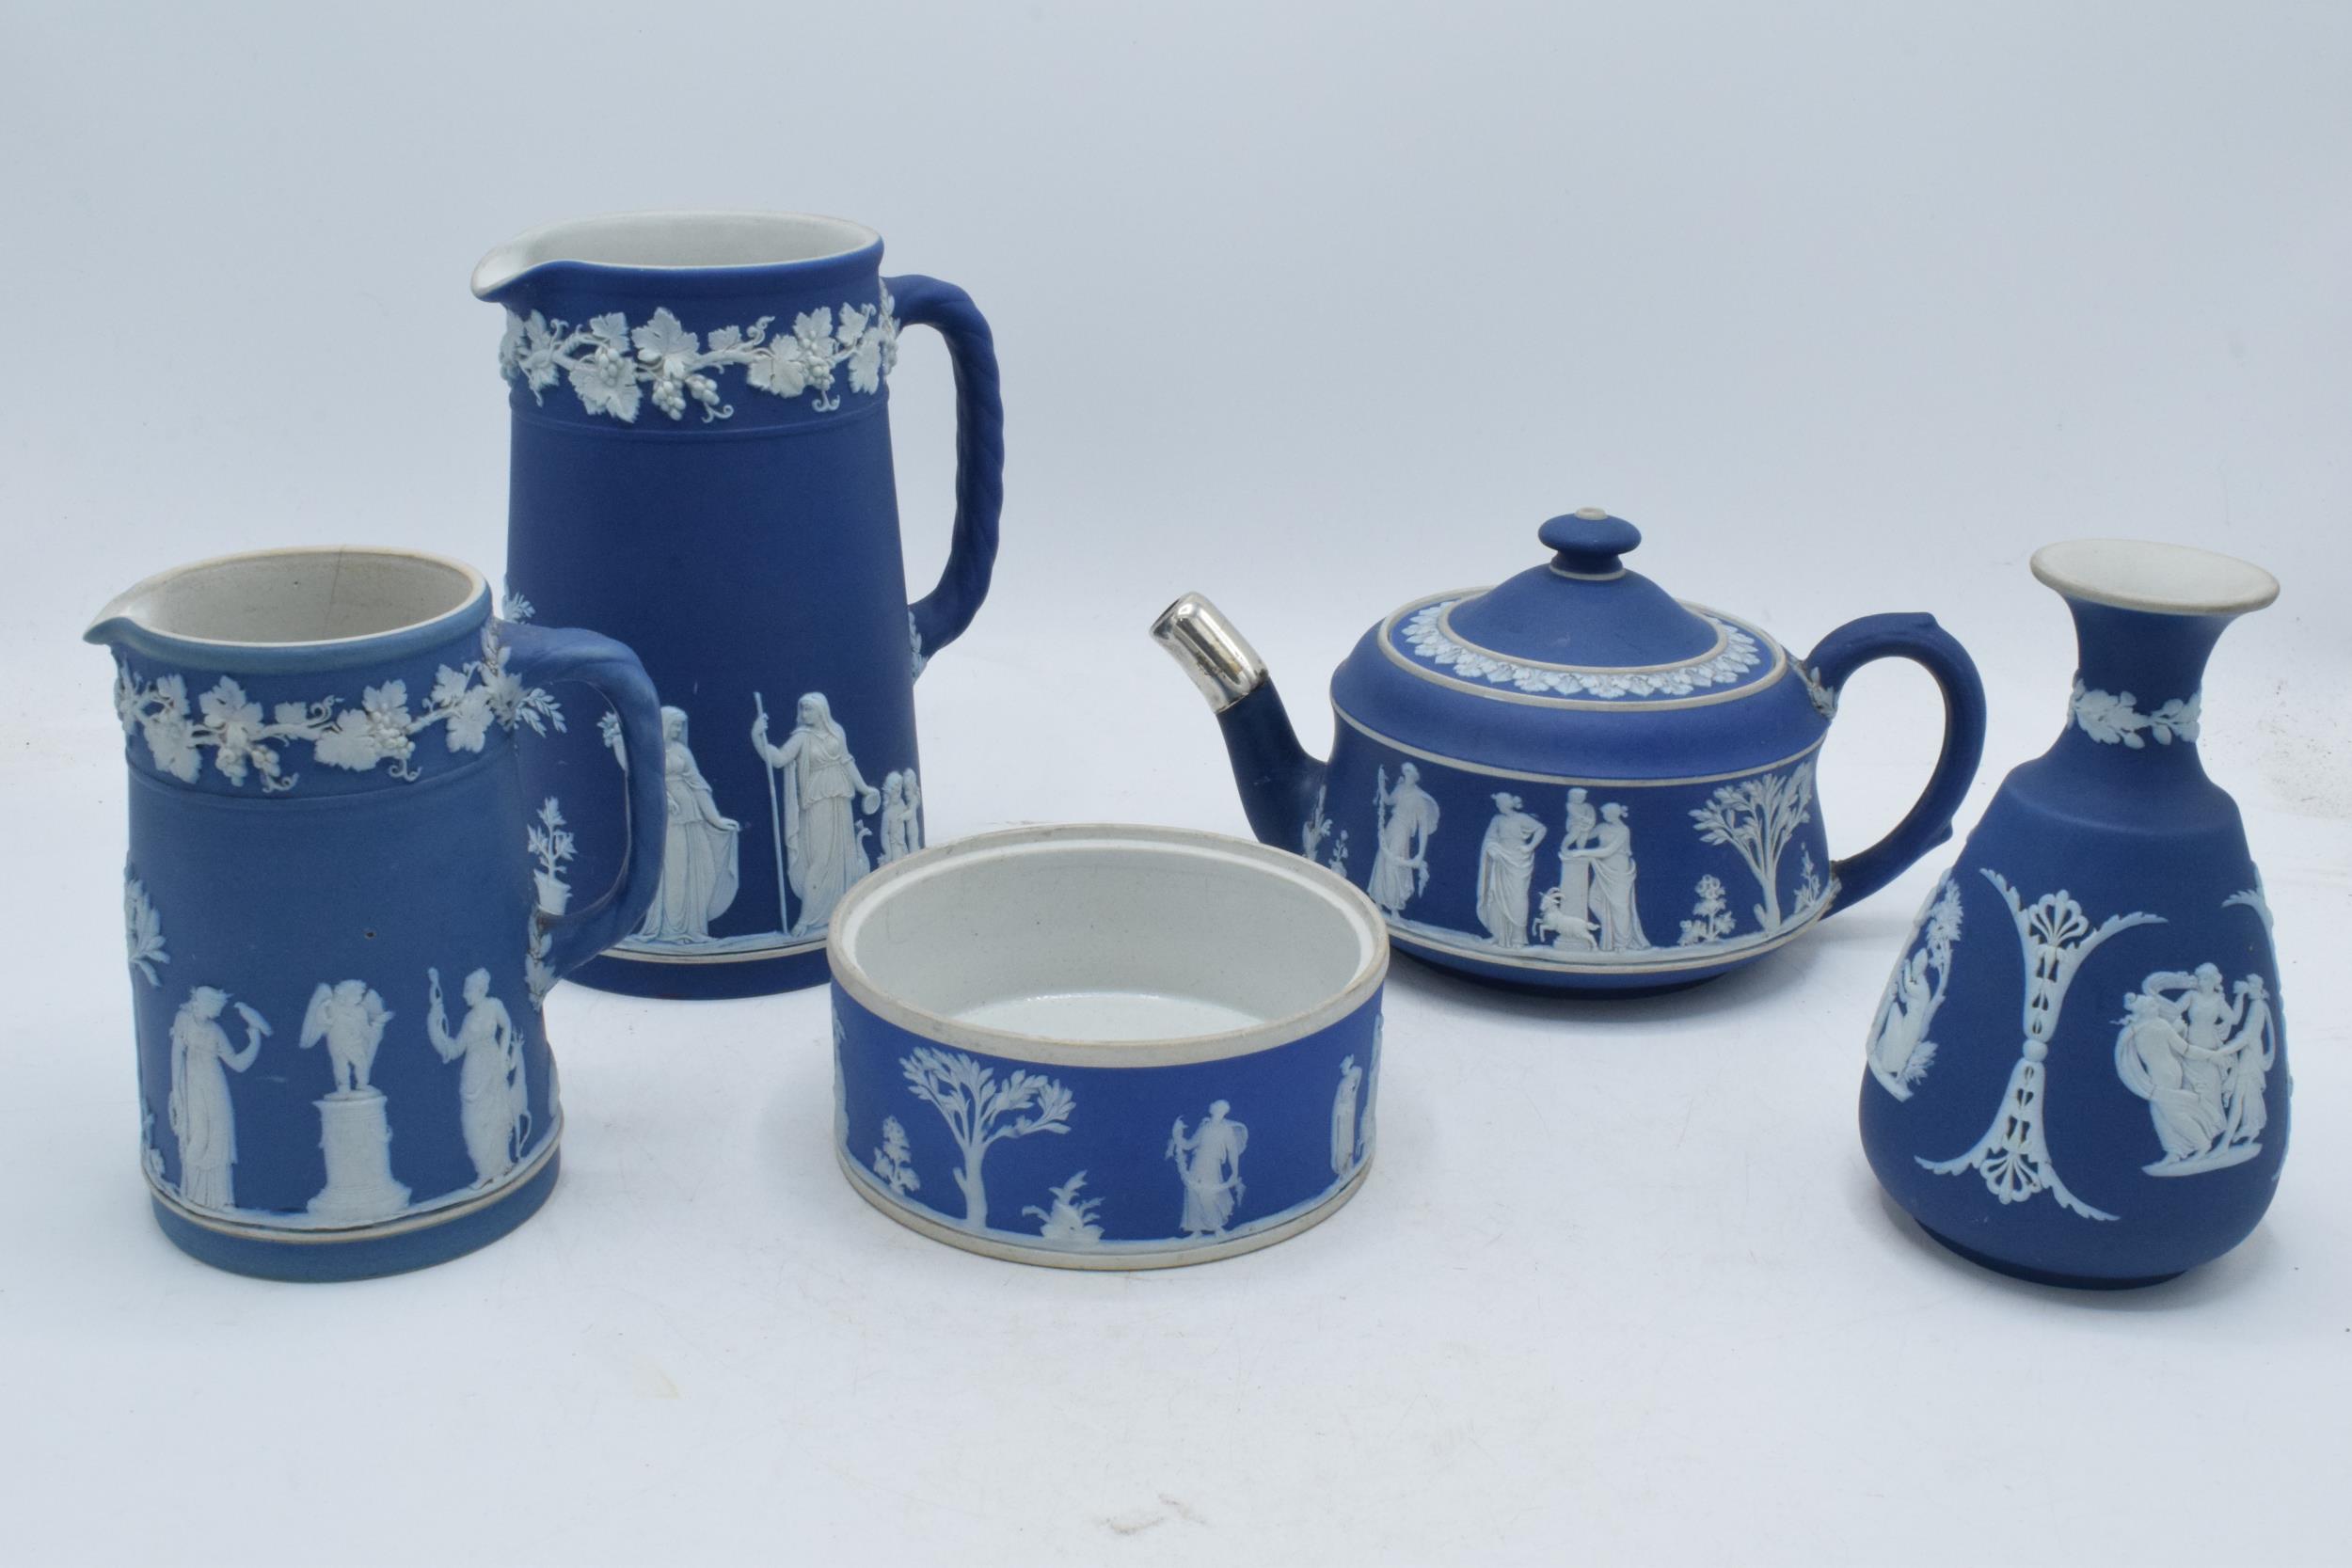 19th century and later Wedgwood Jasperware in dip / dark blue: to include a teapot, water jugs, a